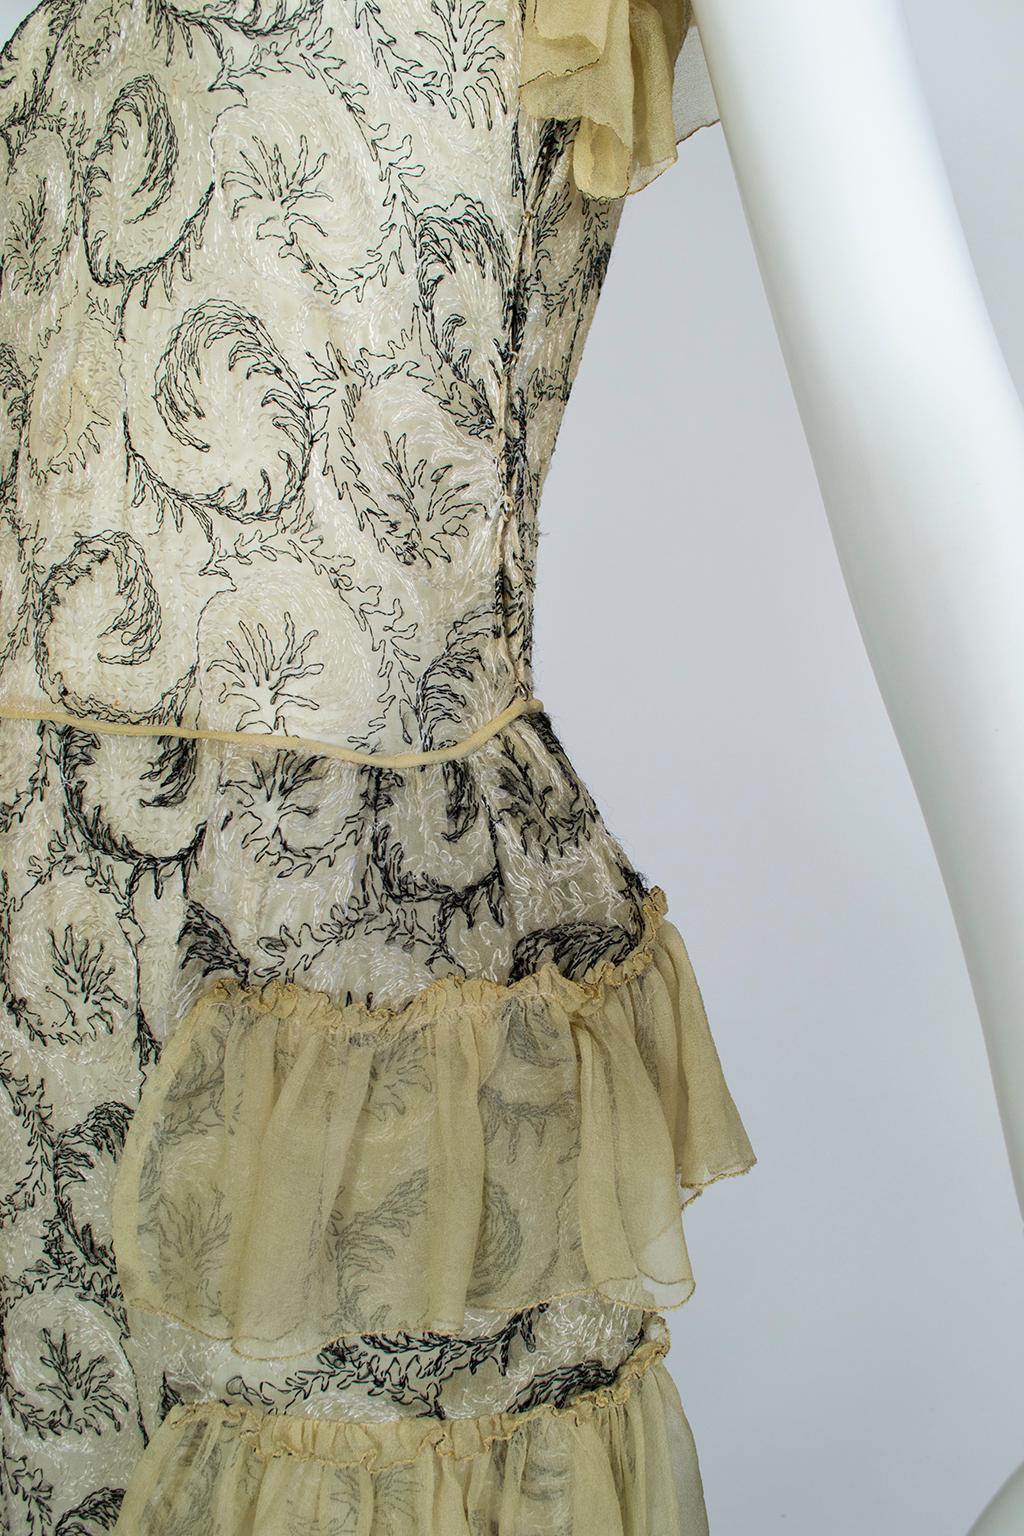 Chartreuse Edwardian Chiffon Robe de Style with Scrolling Embroidery - XS, 1910s For Sale 2